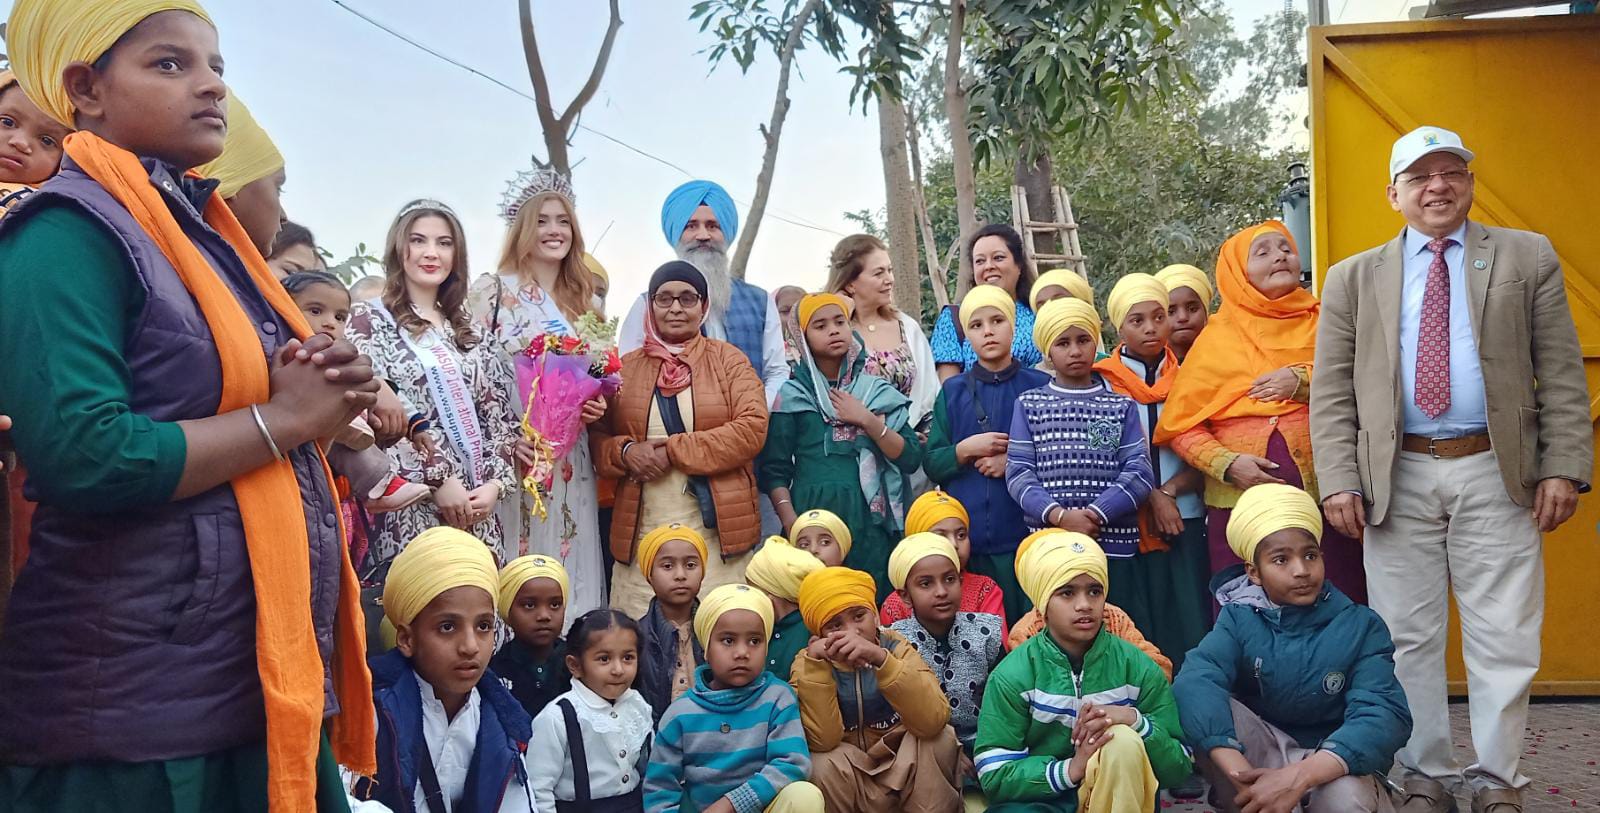 A Miss England Visit to the Eknoor Charitable Trust- Amritsar